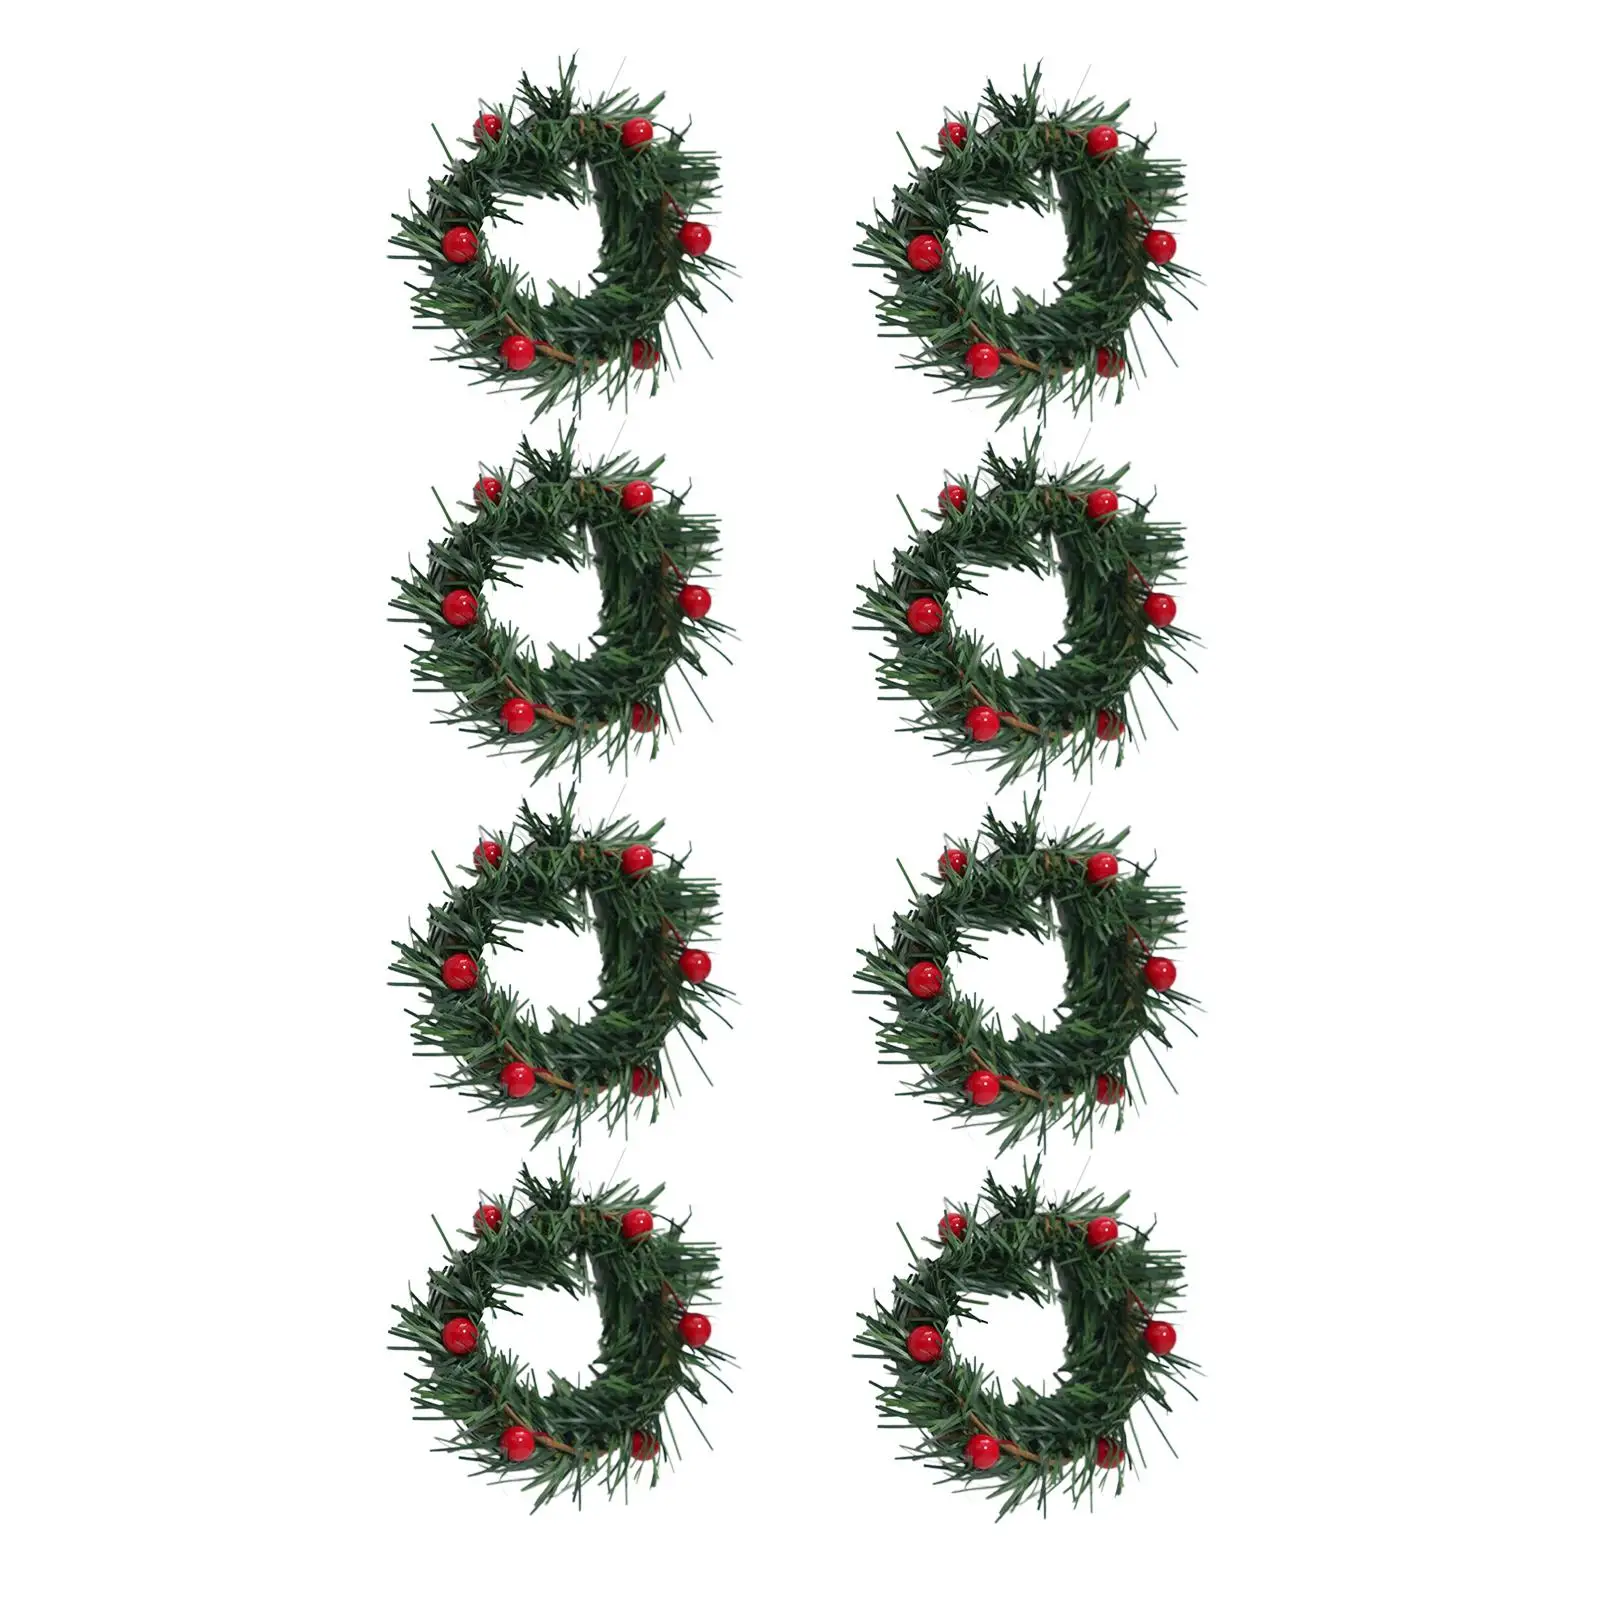 8Pcs Pillar Candle Ring Wreath Floral Arrangement Pillar Candle Holder for Centerpieces Thanksgiving Living Room Table Festival